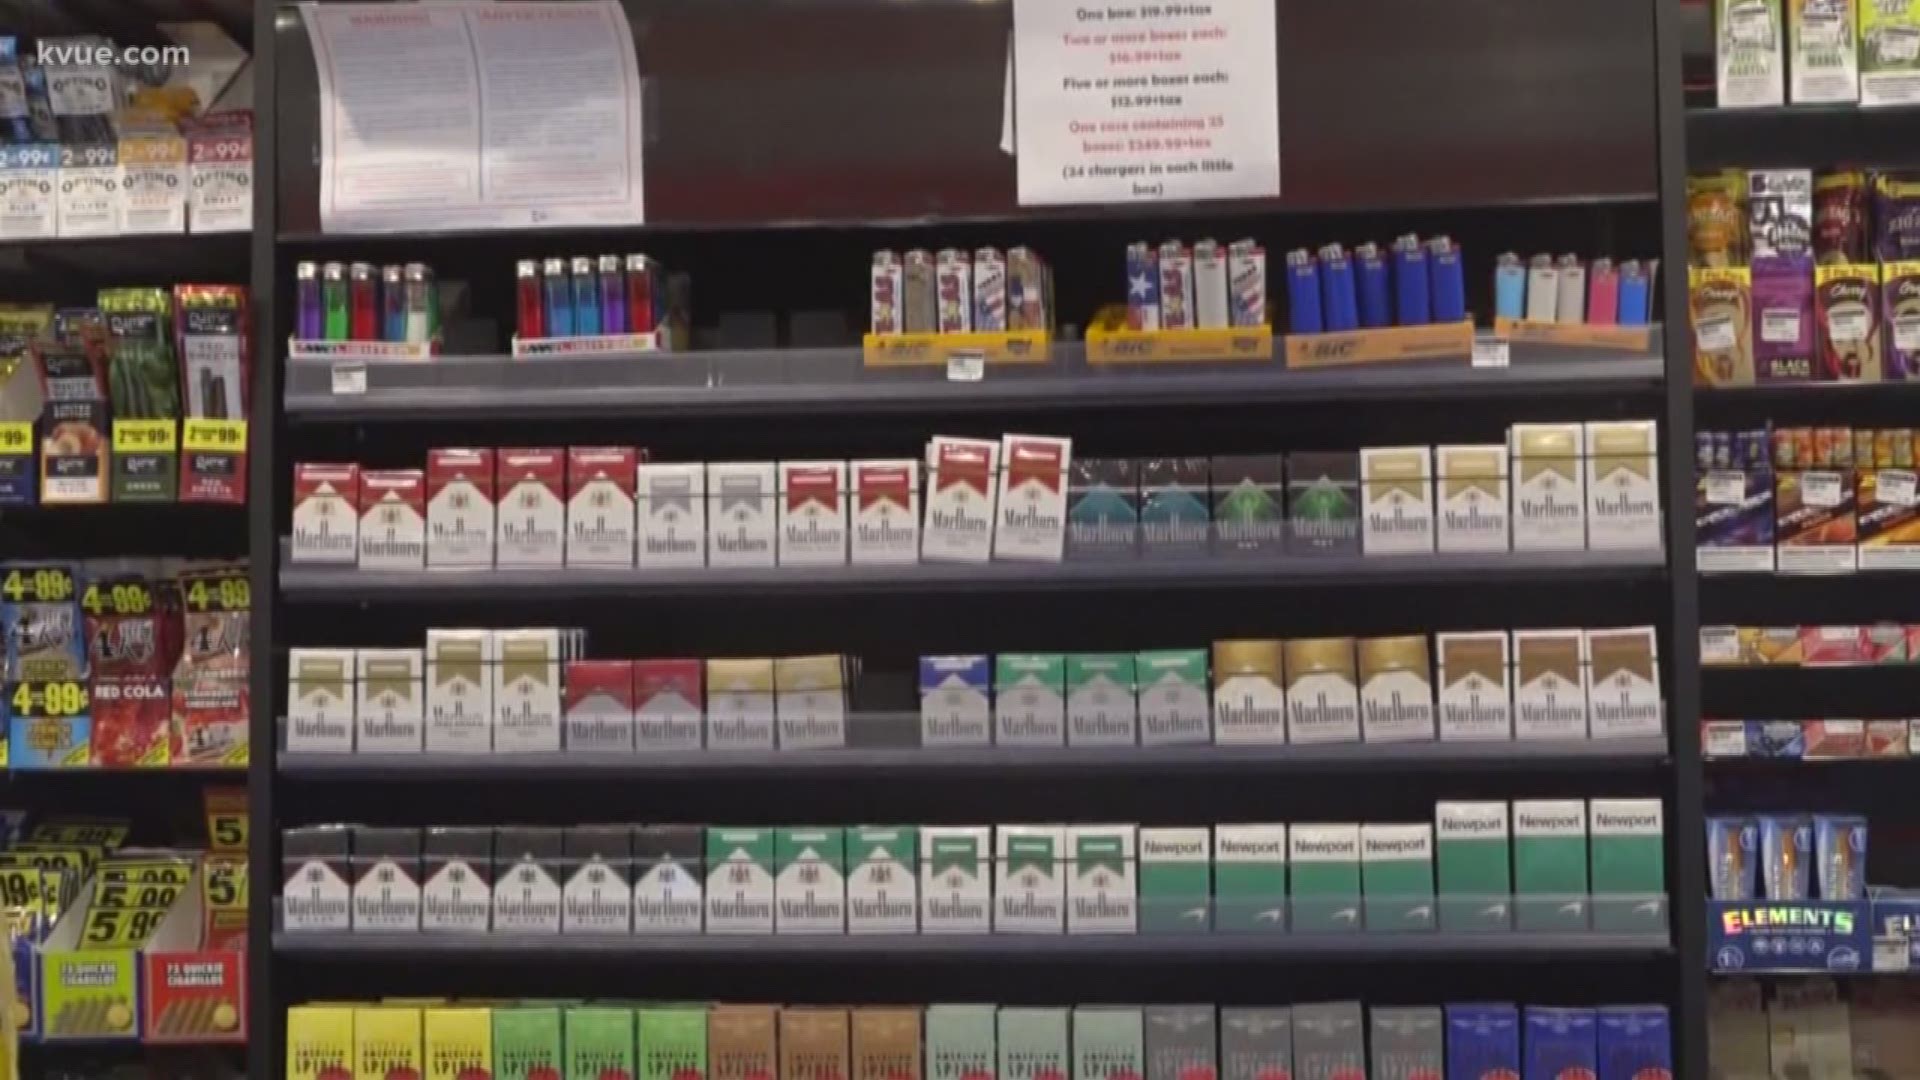 If you're younger than 21, you'll no longer be able to buy tobacco products in San Antonio. In Austin, some are already concerned.